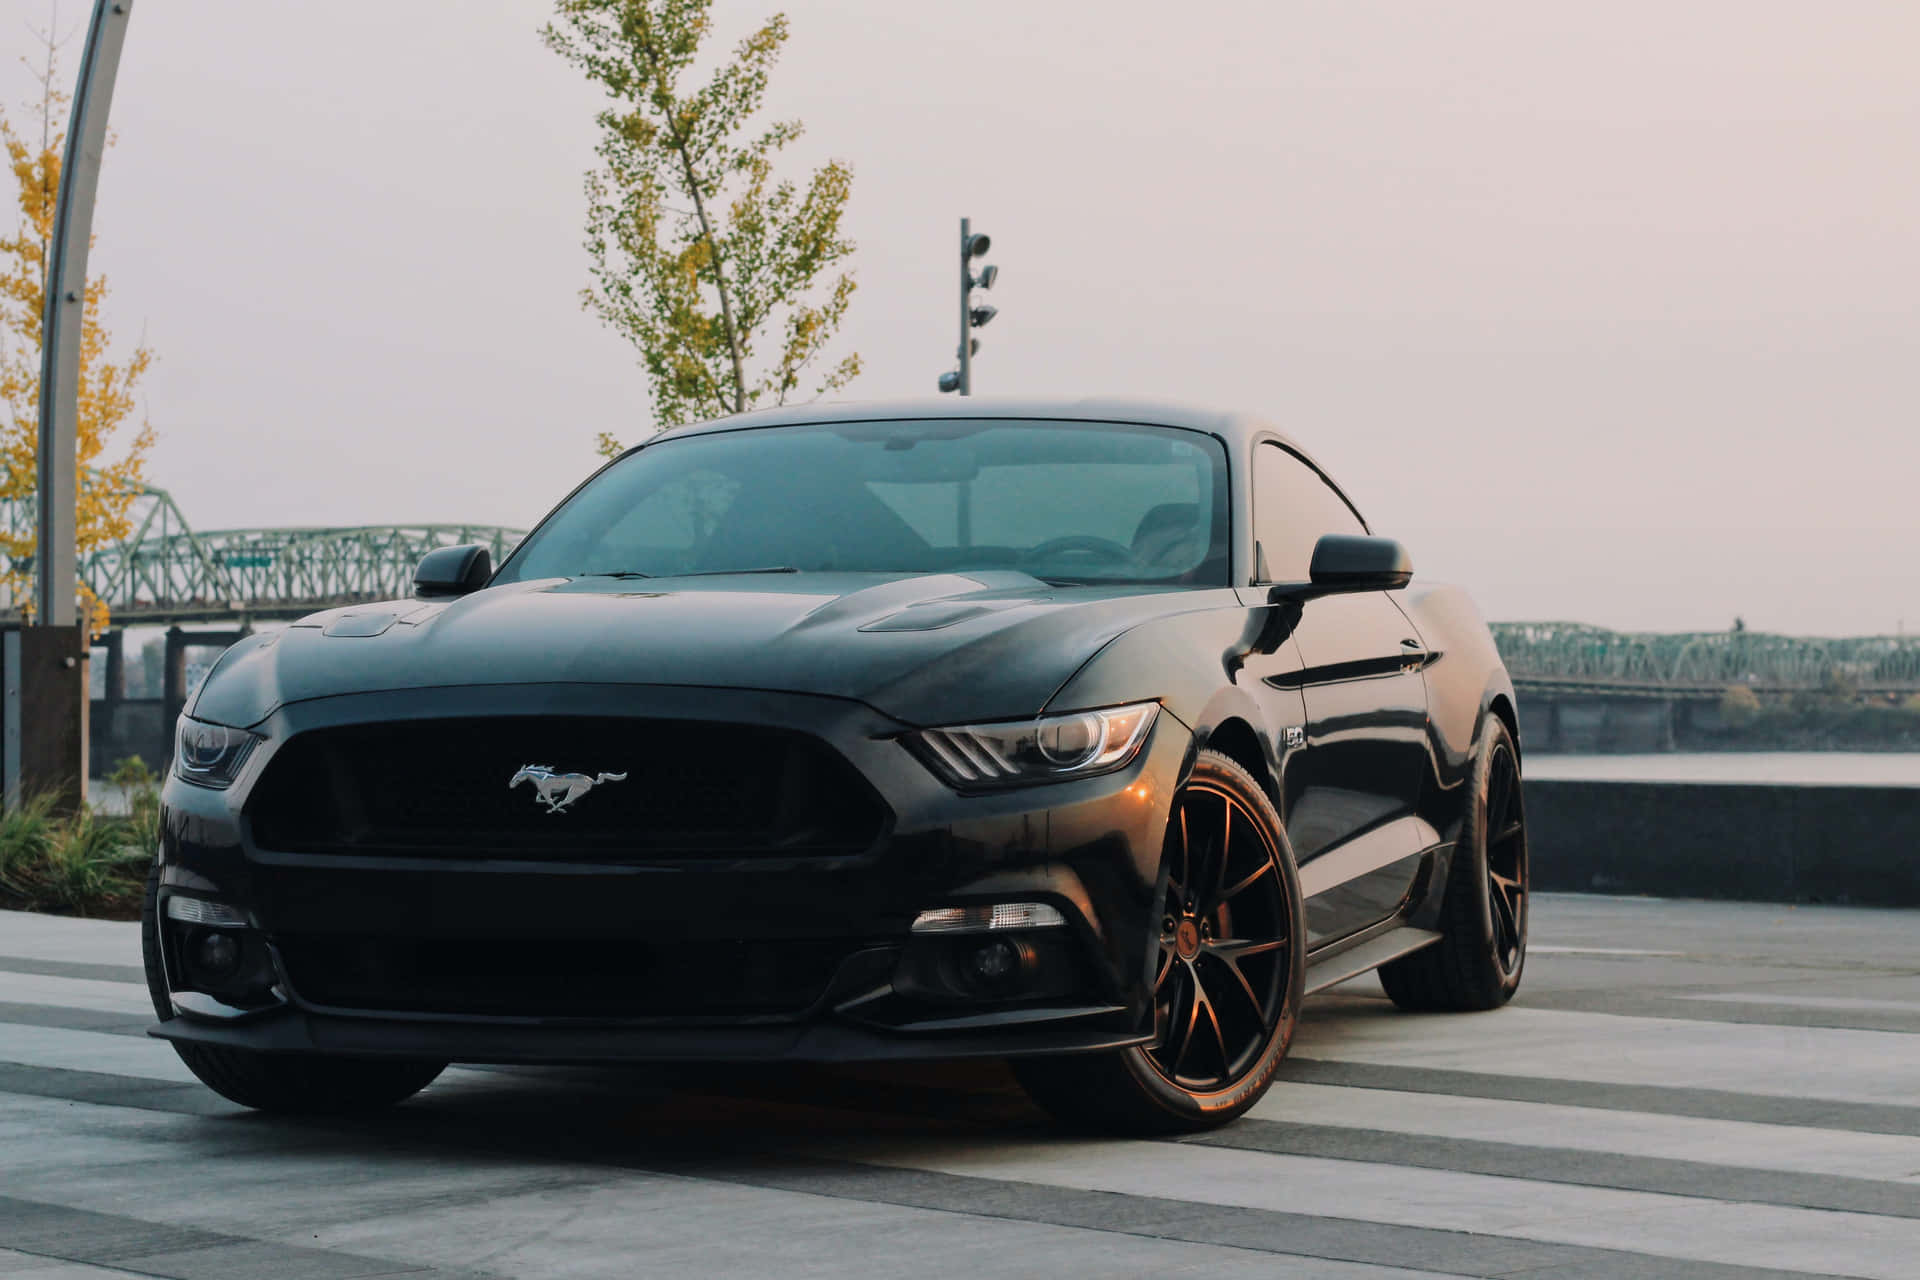 A Black Ford Mustang Parked On A Street